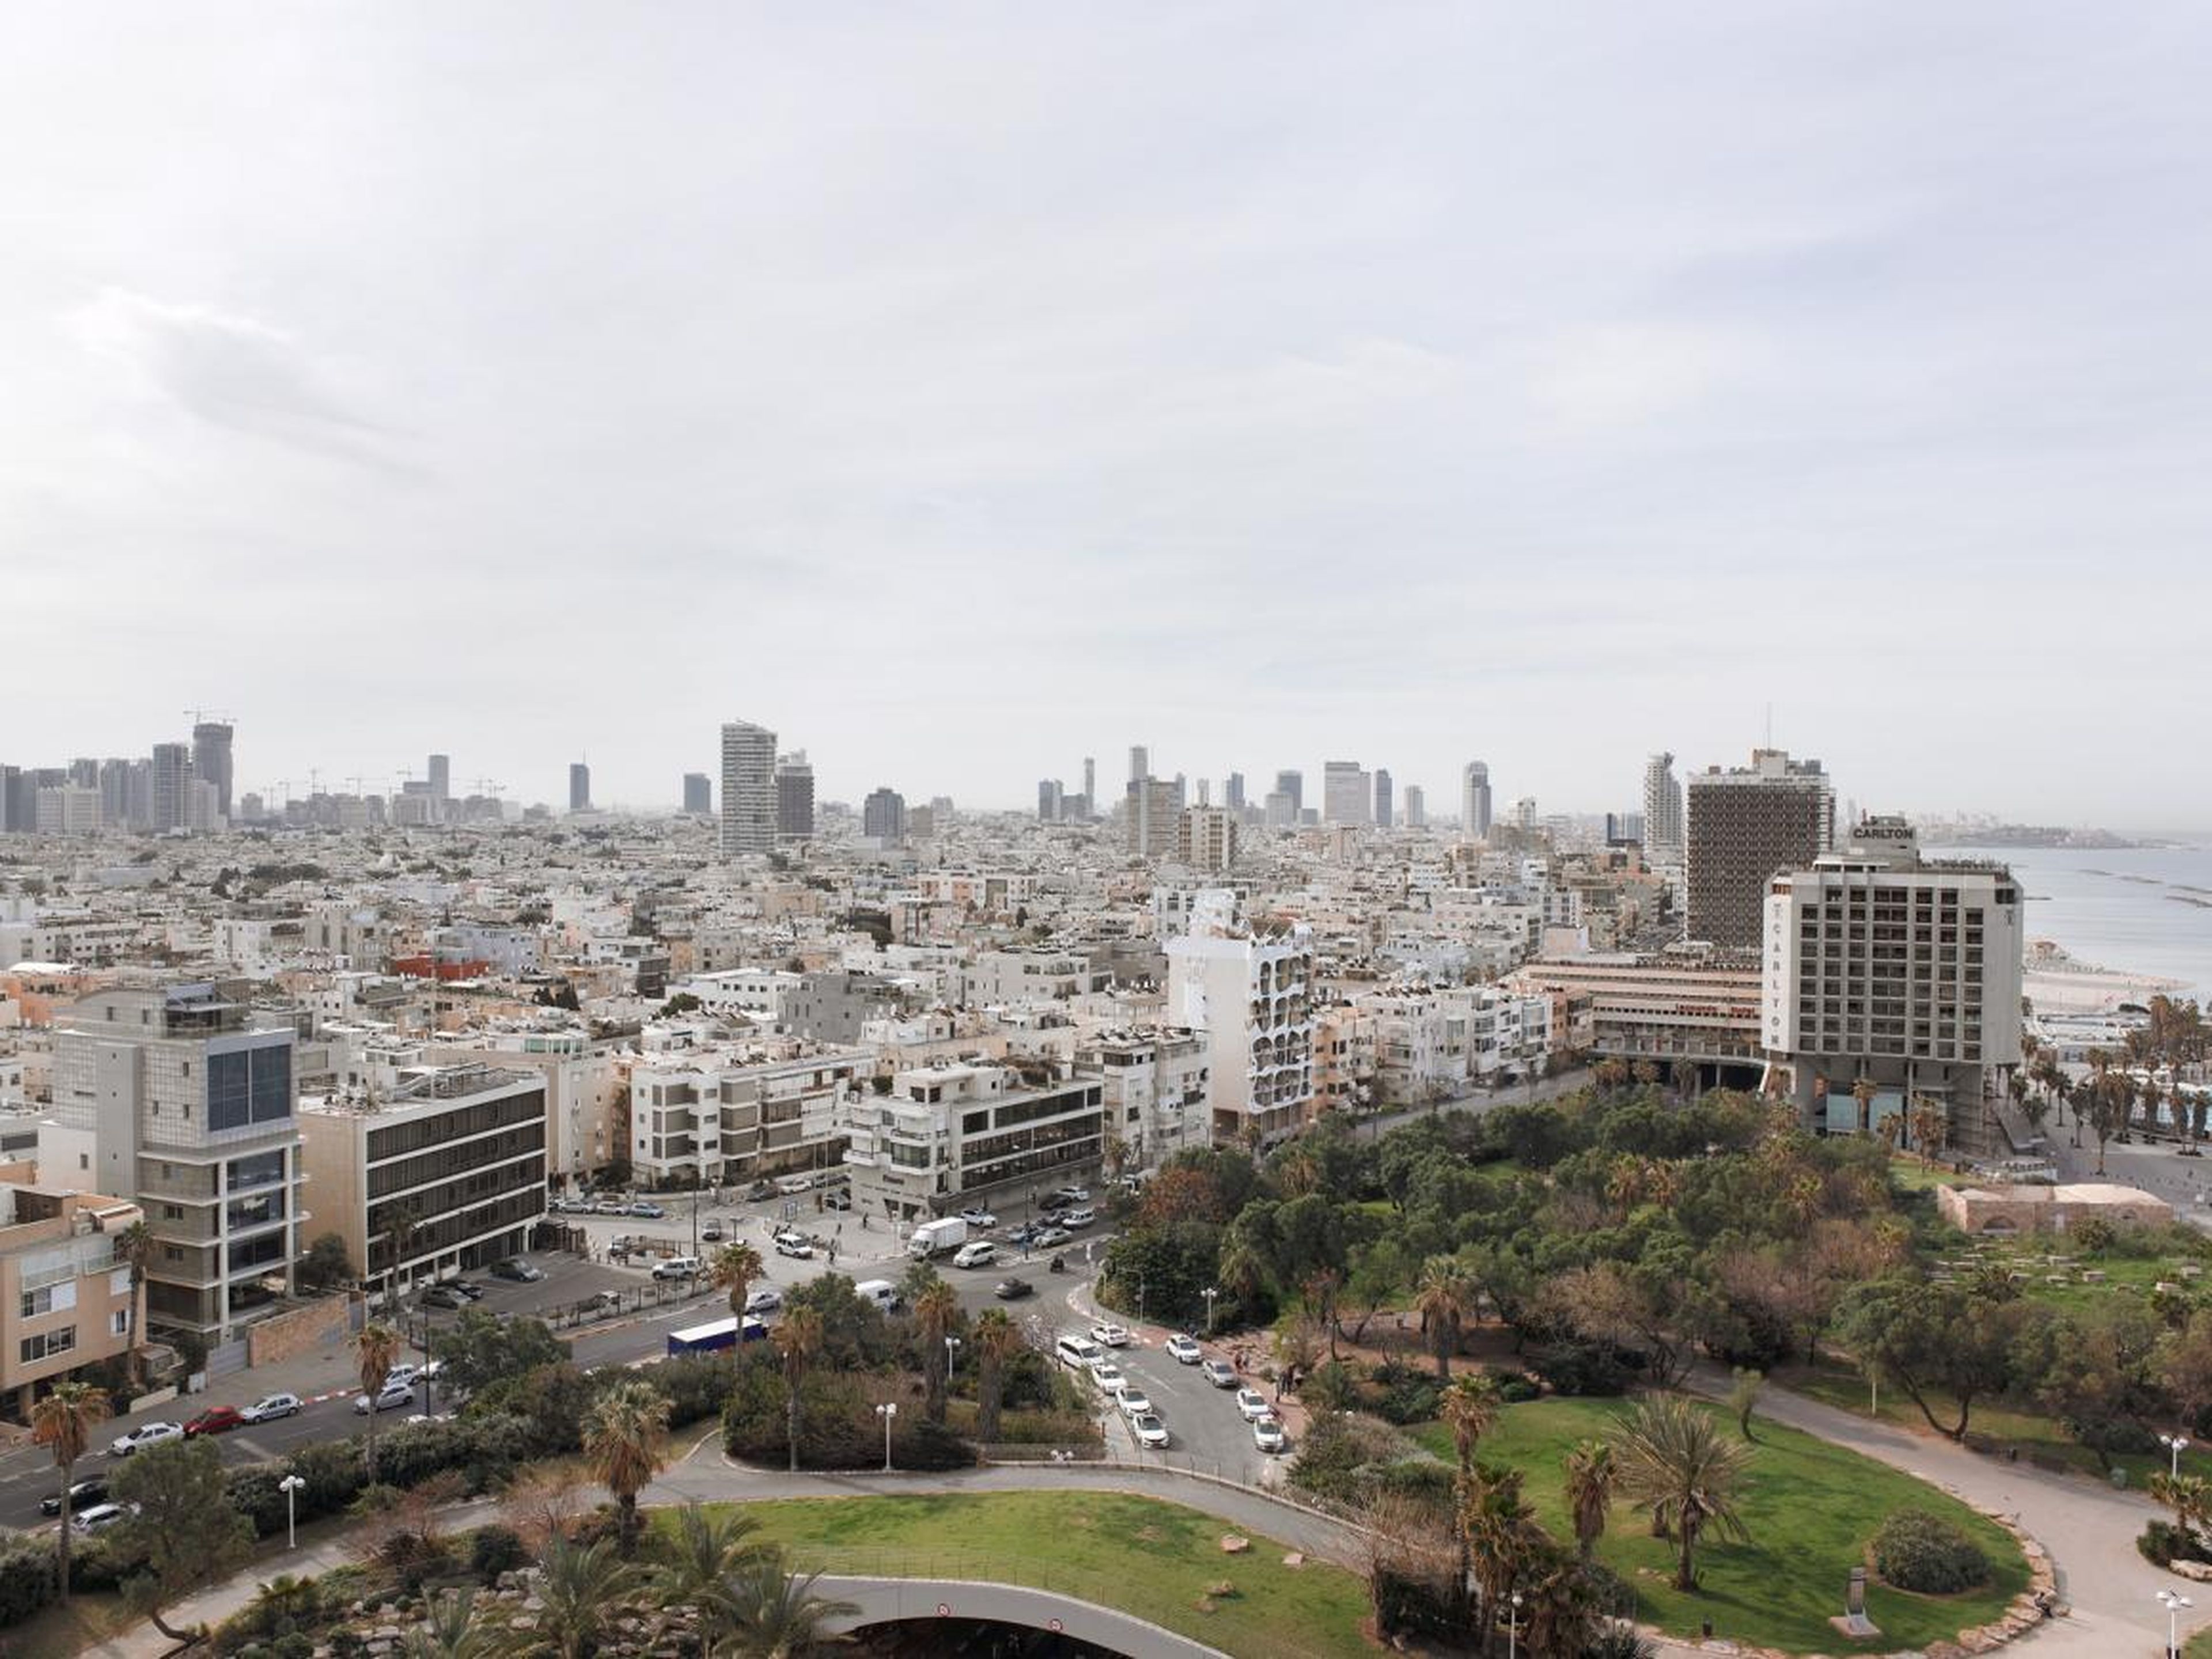 View of Tel Aviv, Israel from the hotel window.